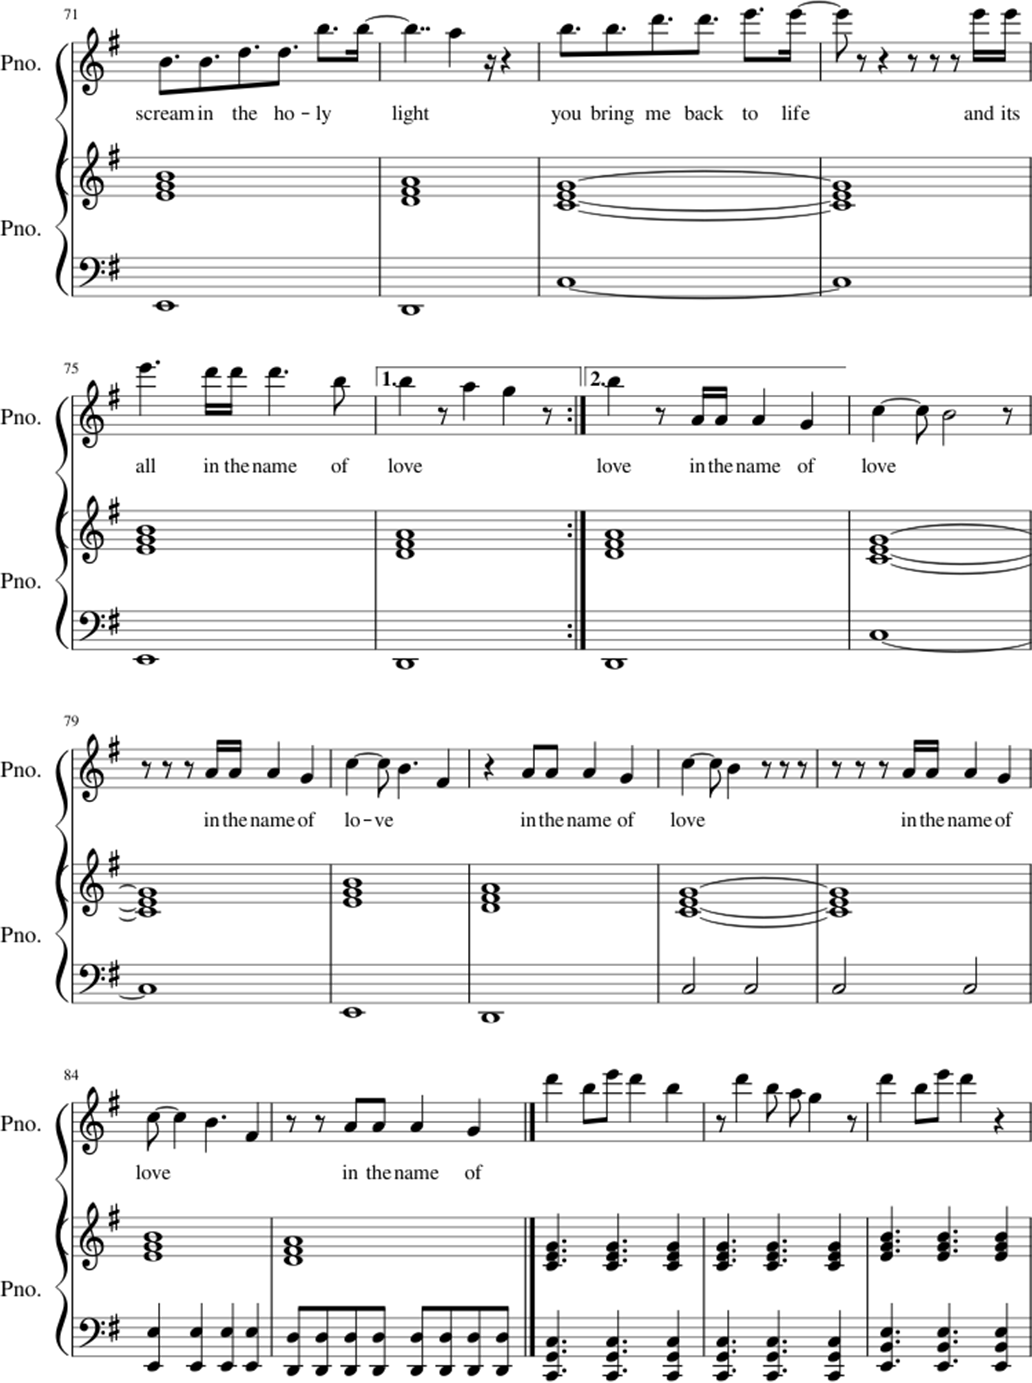 In the name of love sheet music notes 6